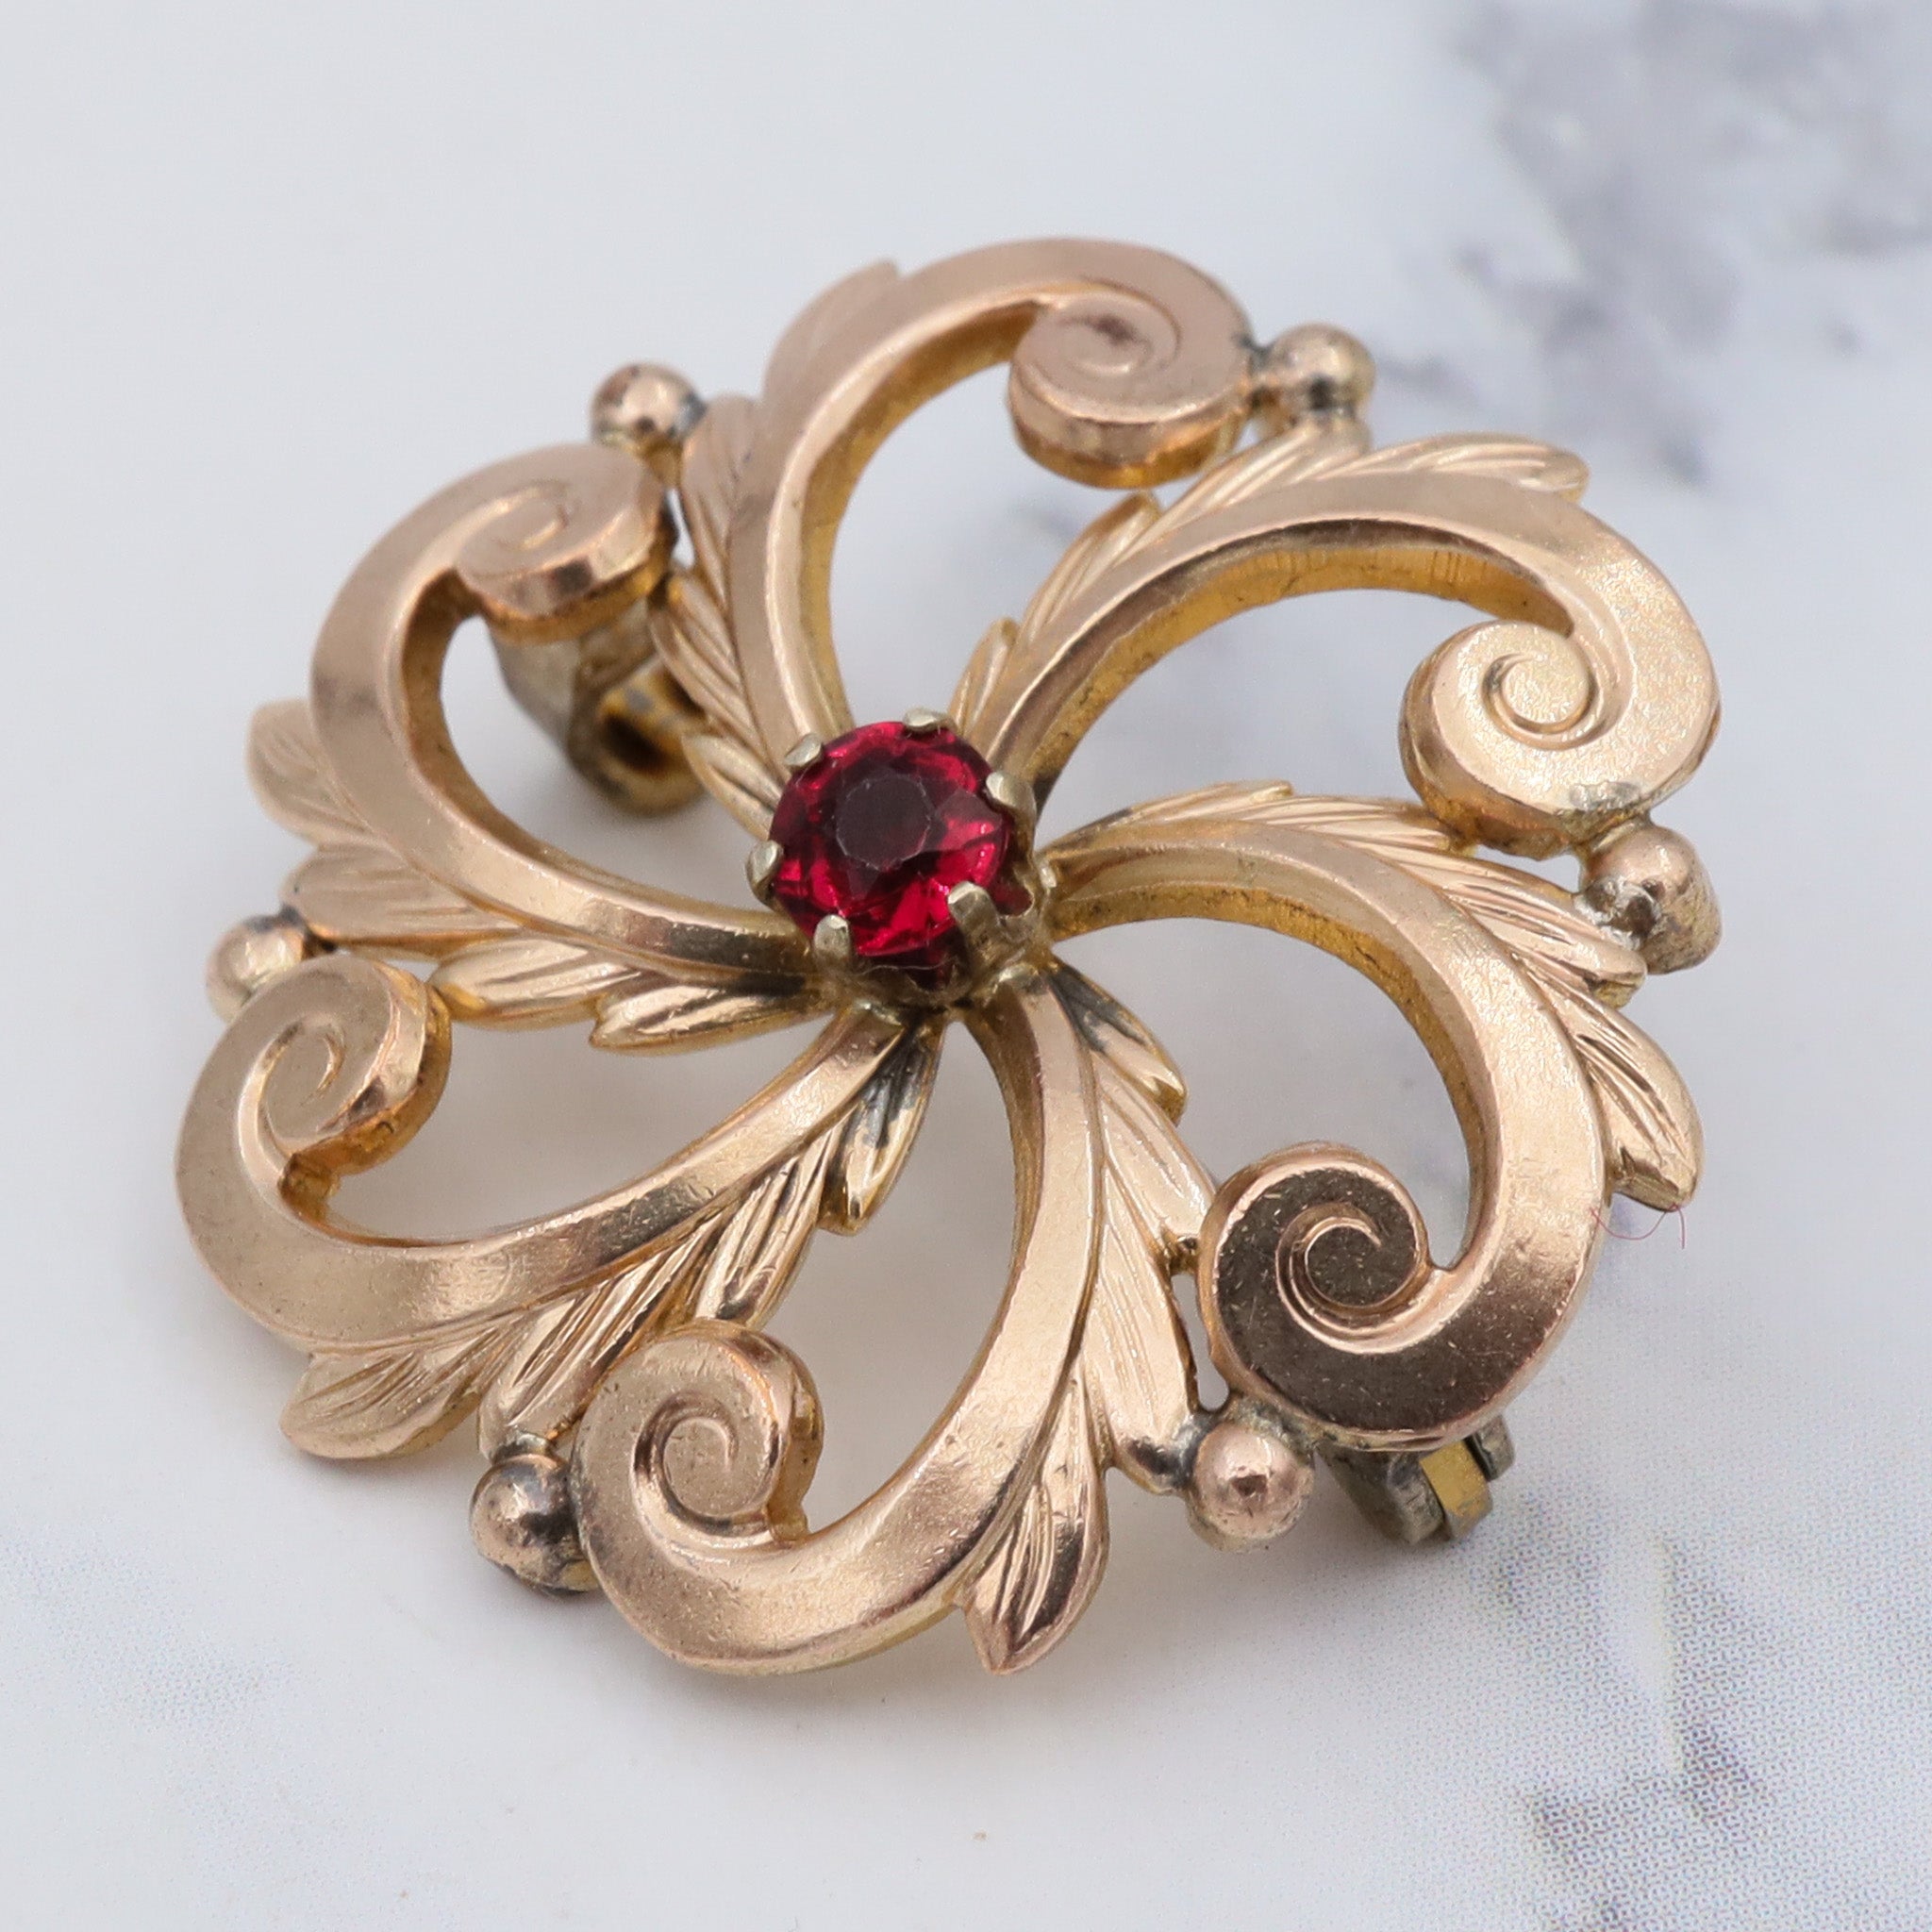 Antique Victorian pinchbeck swirl flower brooch with ruby crystal